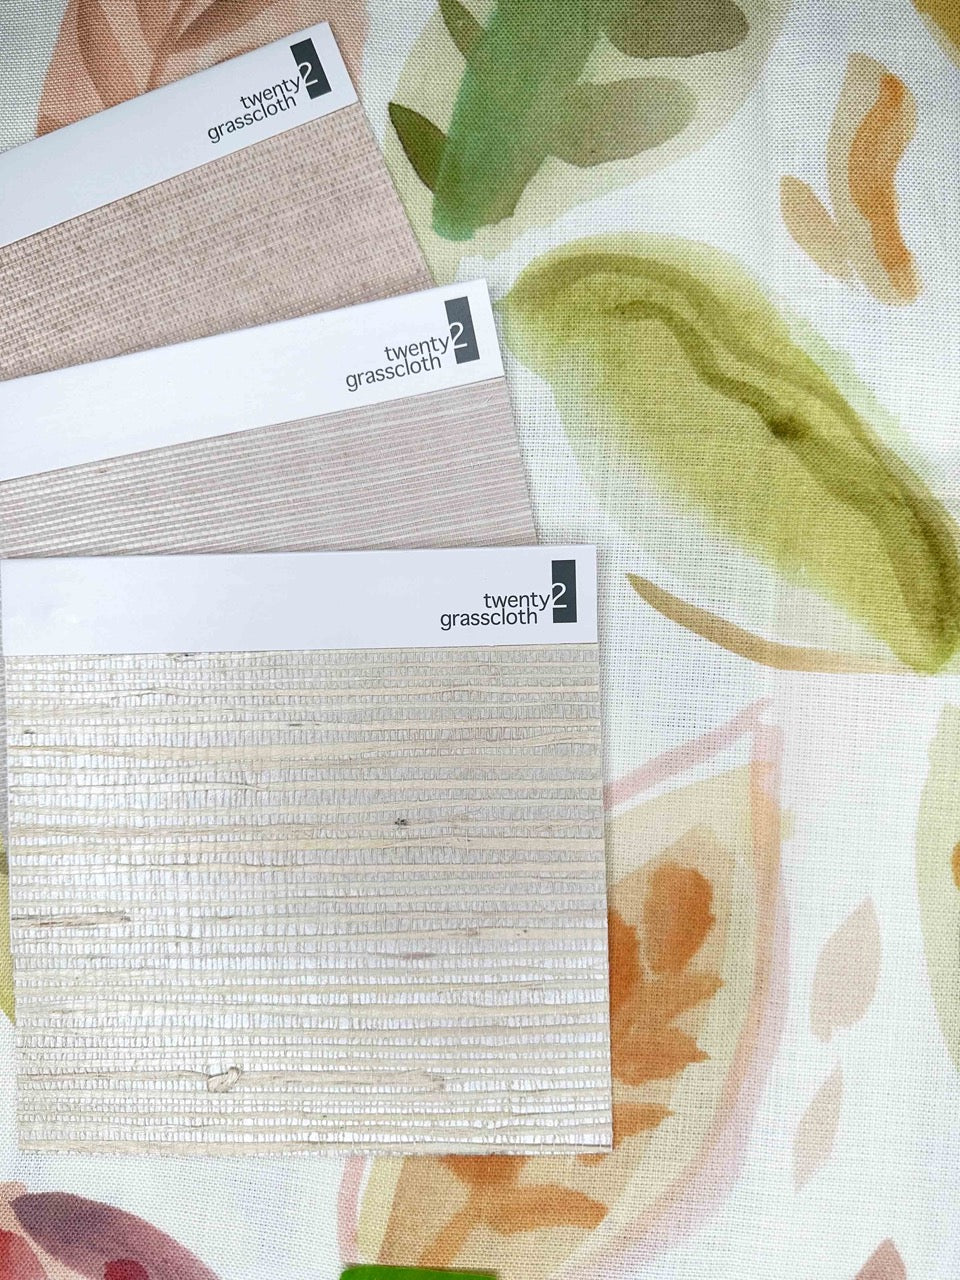 Grasscloth swatches from the "twenty2 grasscloth" collection in earthy tones on a floral print background, perfect for spring interior design.